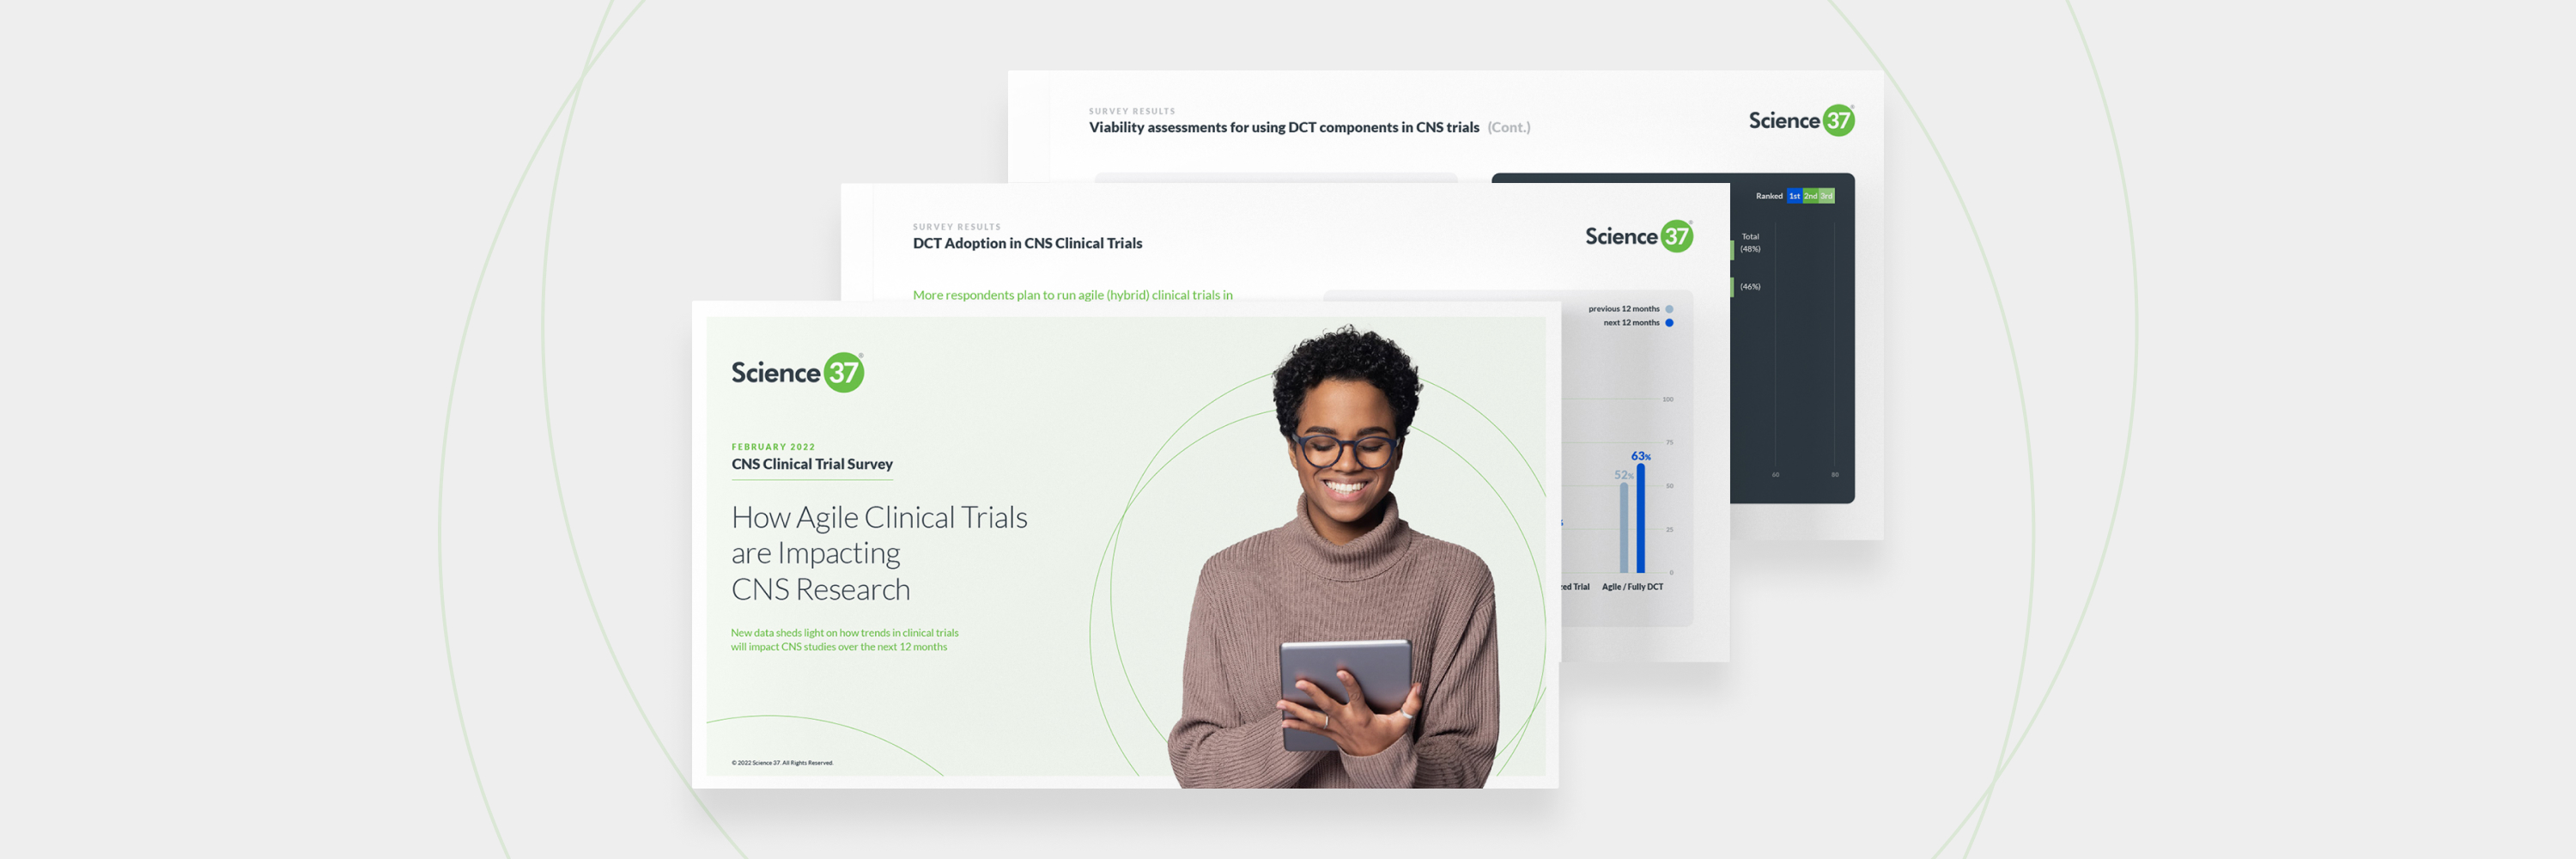 How will decentralization impact CNS (central nervous system) clinical trials? Science 37 has surveyed research executives at trial-sponsoring organizations, uncovering pivotal insights on how clinical research trends are impacting the CNS space.